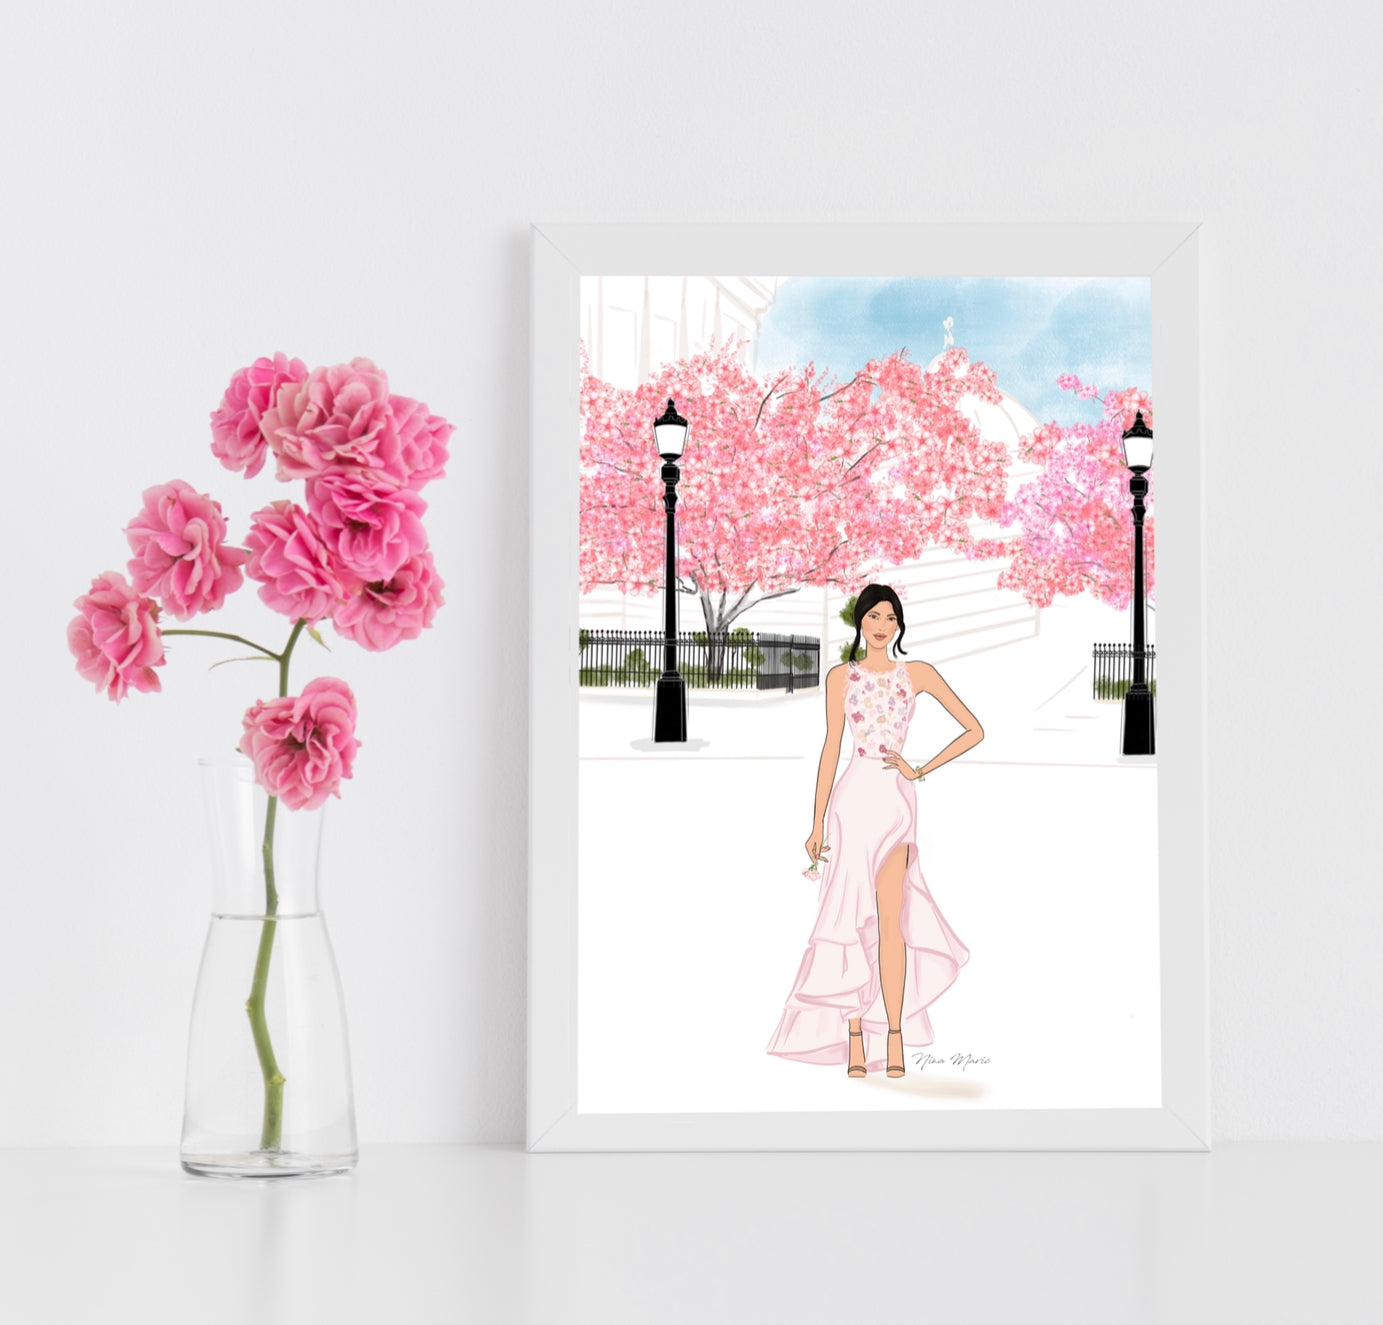 Cherry-blossom-art-illustration-woman-in-pink-dress-city-art-by-fashion-illustrator-Nina-Maric-of-Chic-on-Paper